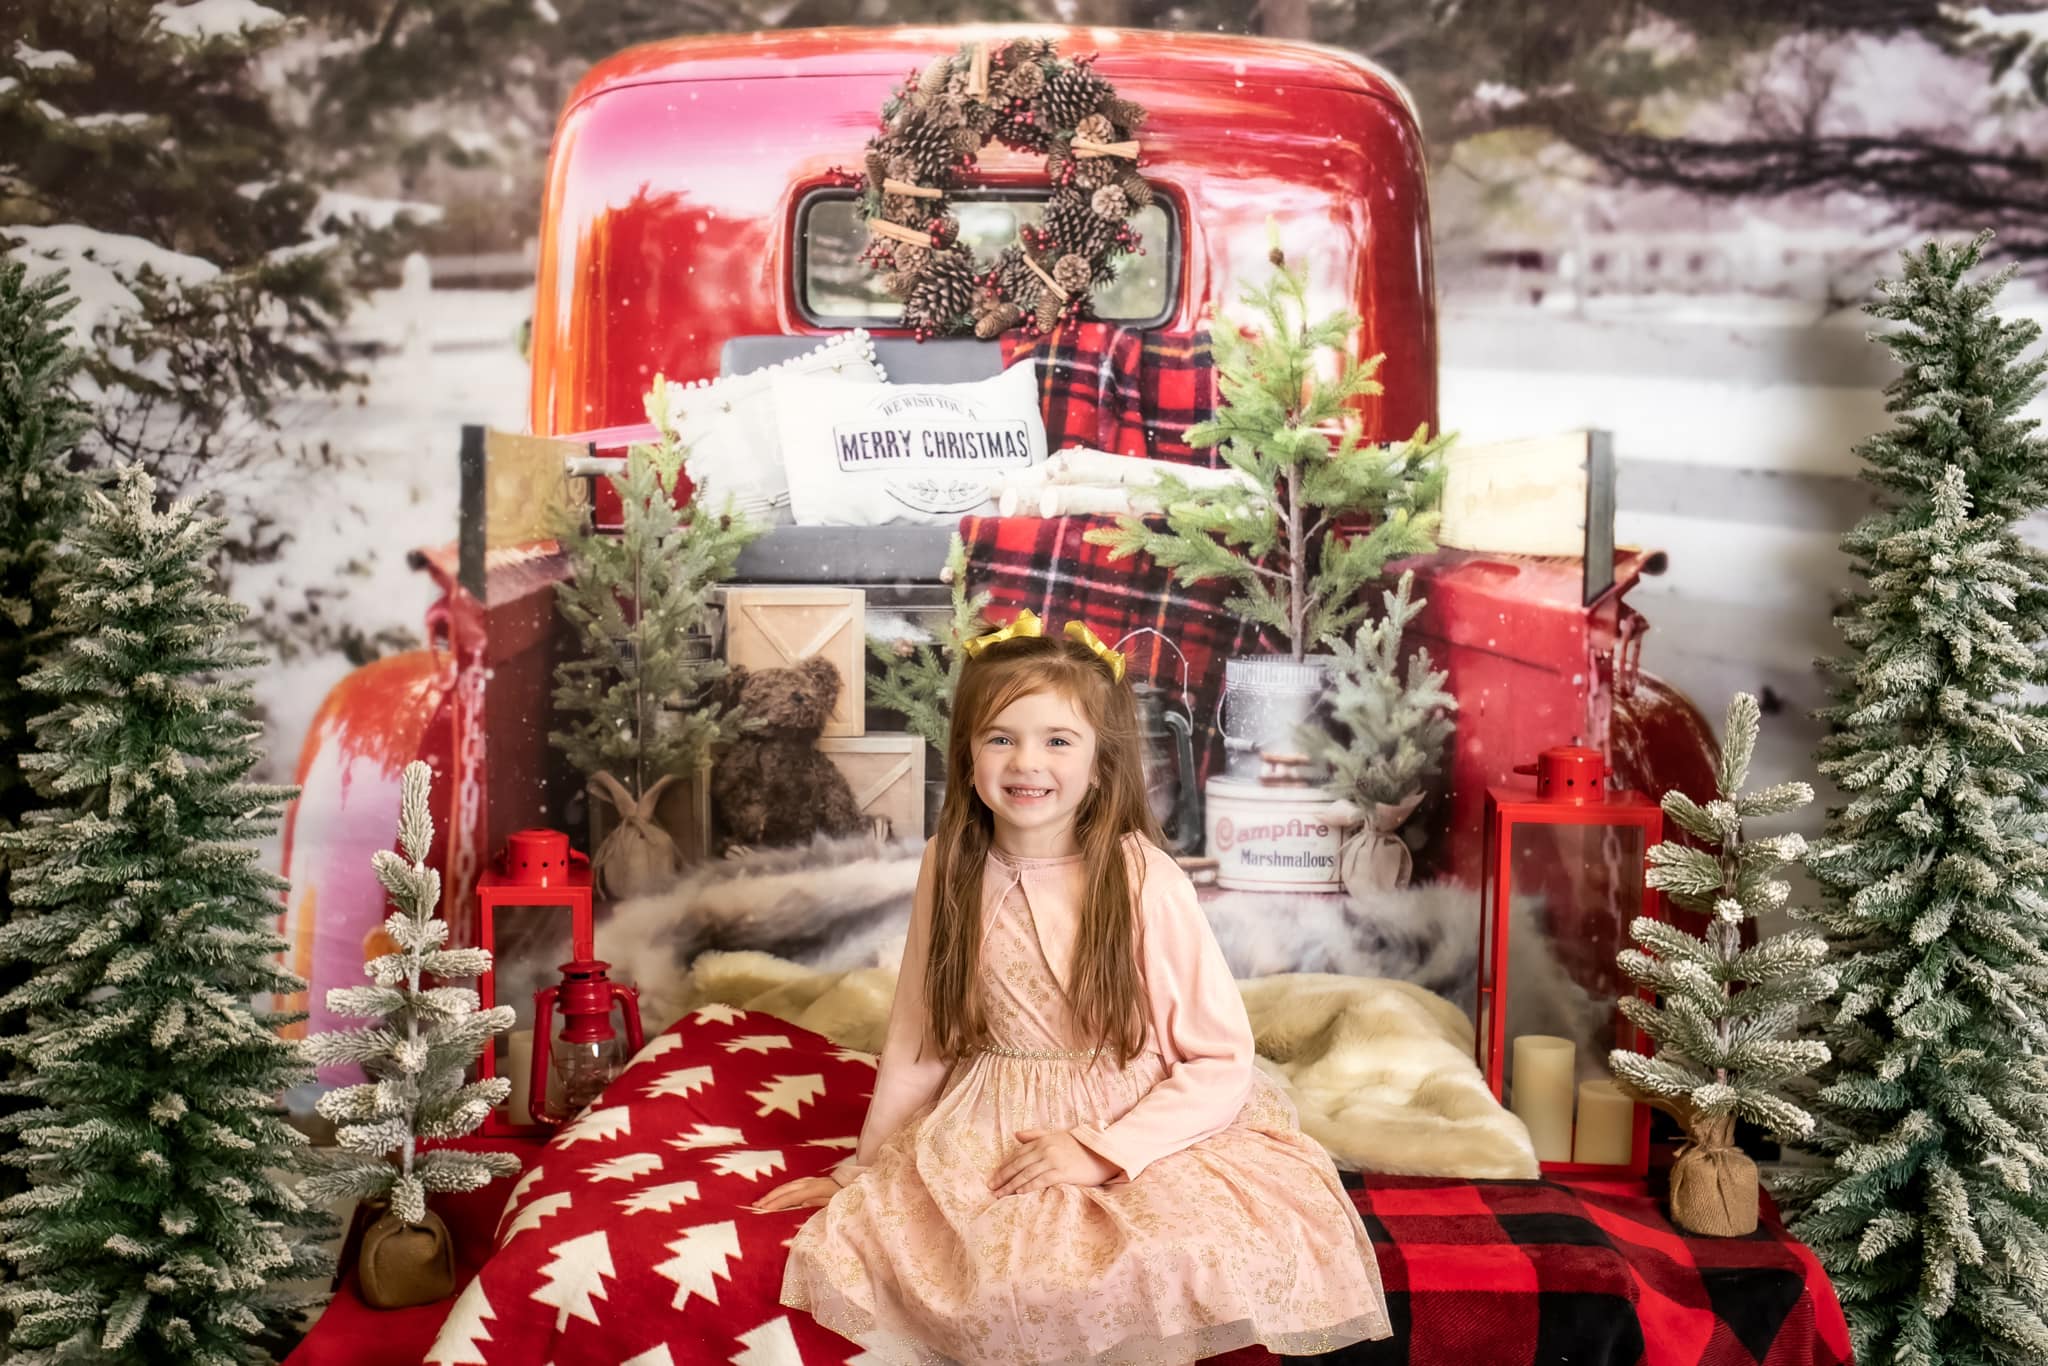 RTS Kate Red Christmas Truck in Snow Backdrop Designed by Mandy Ringe Photography